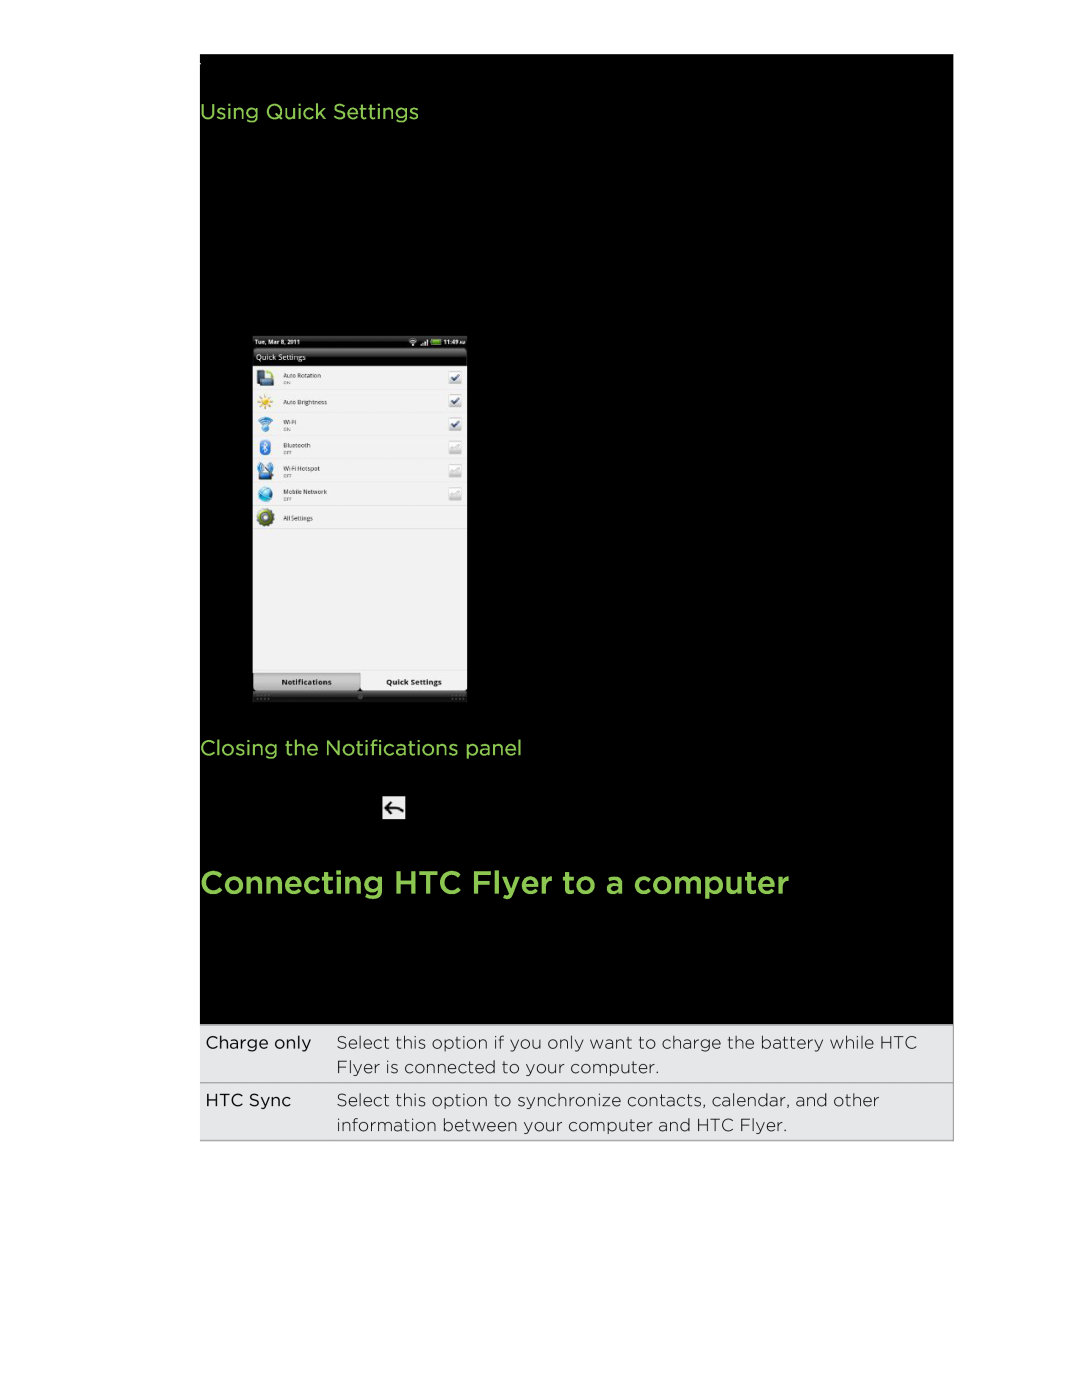 HTC HTCFlyerP512 manual Connecting HTC Flyer to a computer, Using Quick Settings, Closing the Notifications panel 